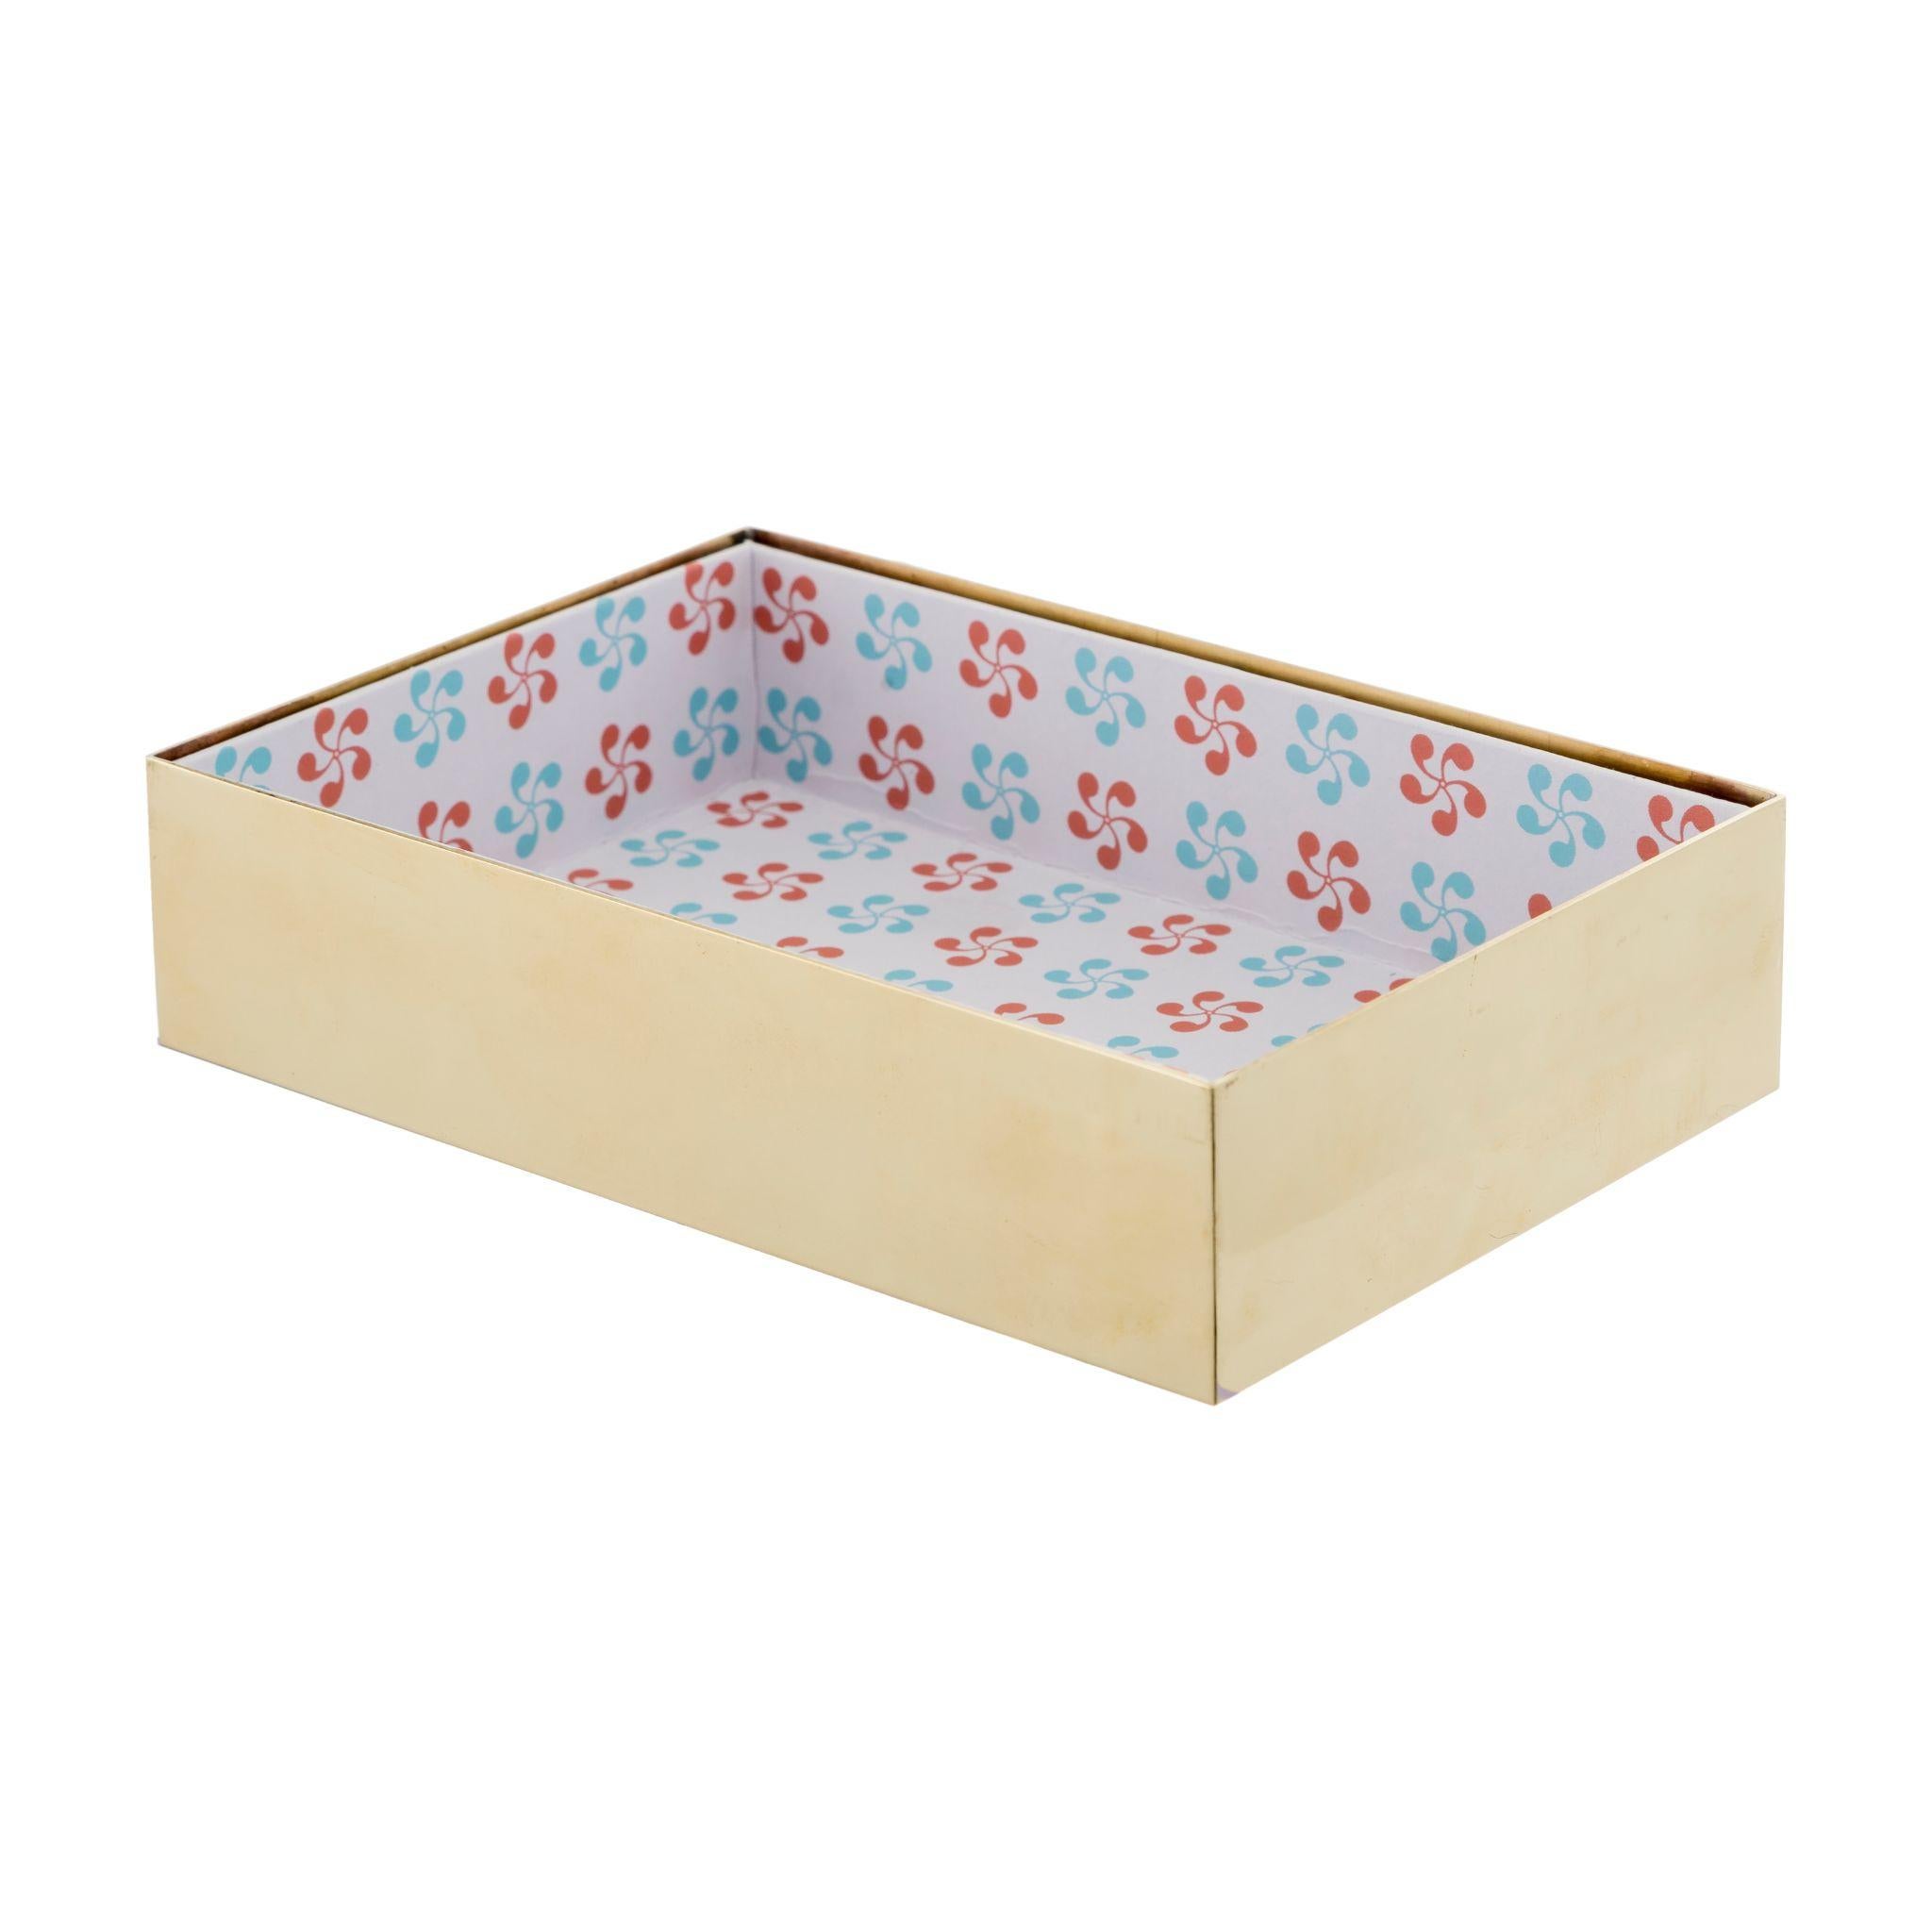 Organize your small items in style with our elegant rectangular-shaped brass box. Made from high-quality brass, its unique and stylish design adds sophistication to any space. Perfect for storing jewelry, trinkets, and other small items, it is a